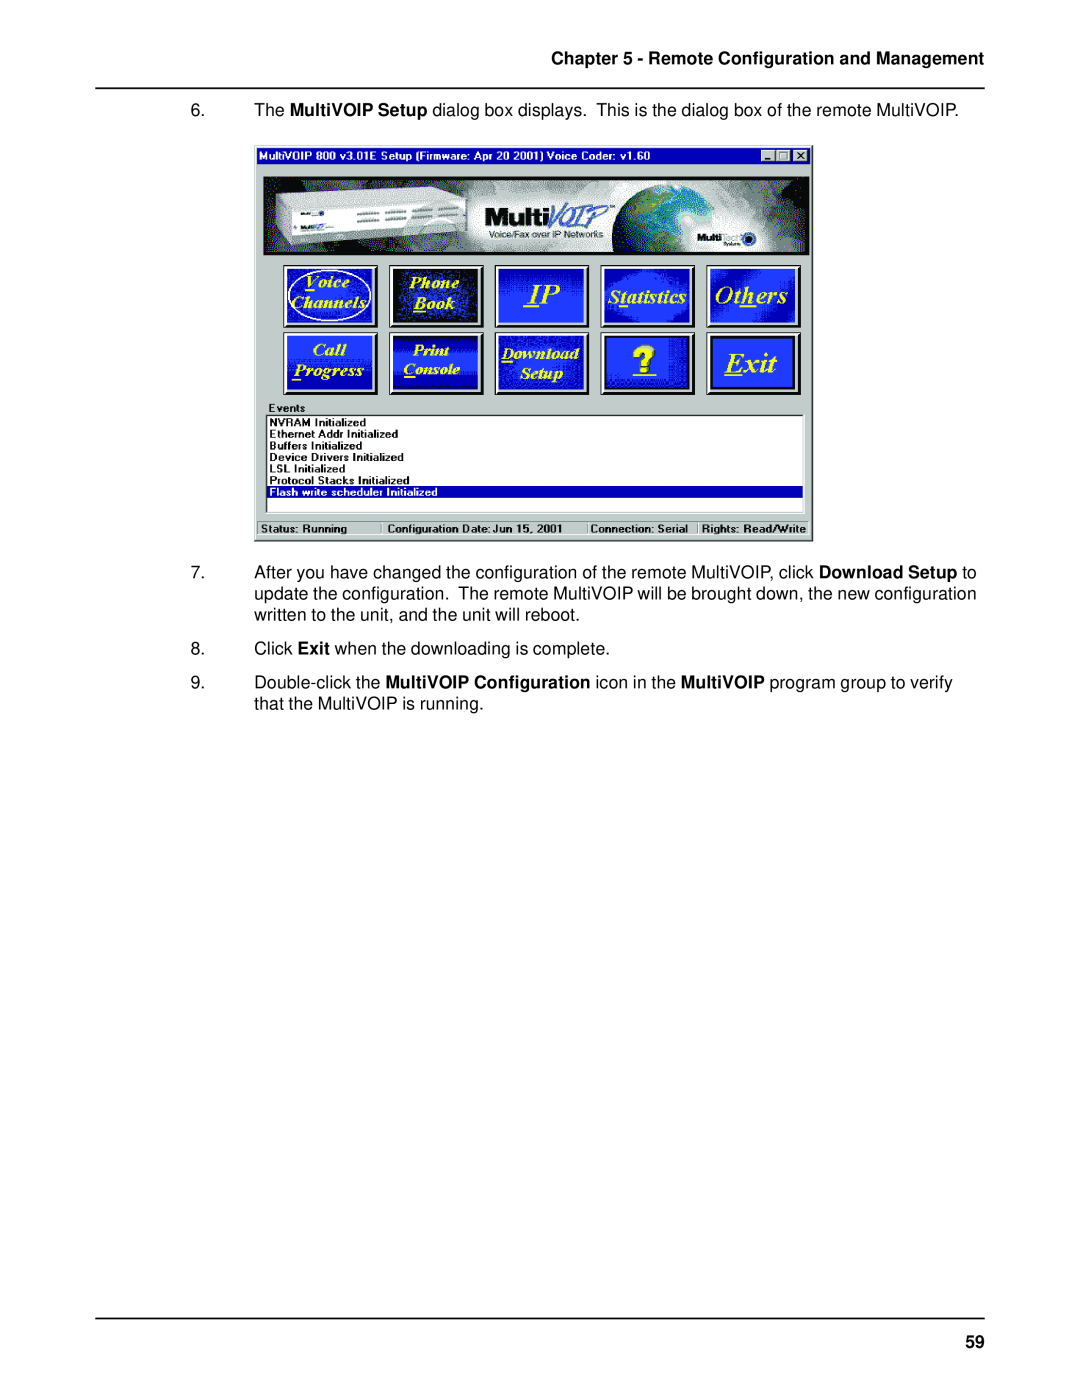 Multi-Tech Systems MVP 800 manual Remote Configuration and Management, Click Exit when the downloading is complete 